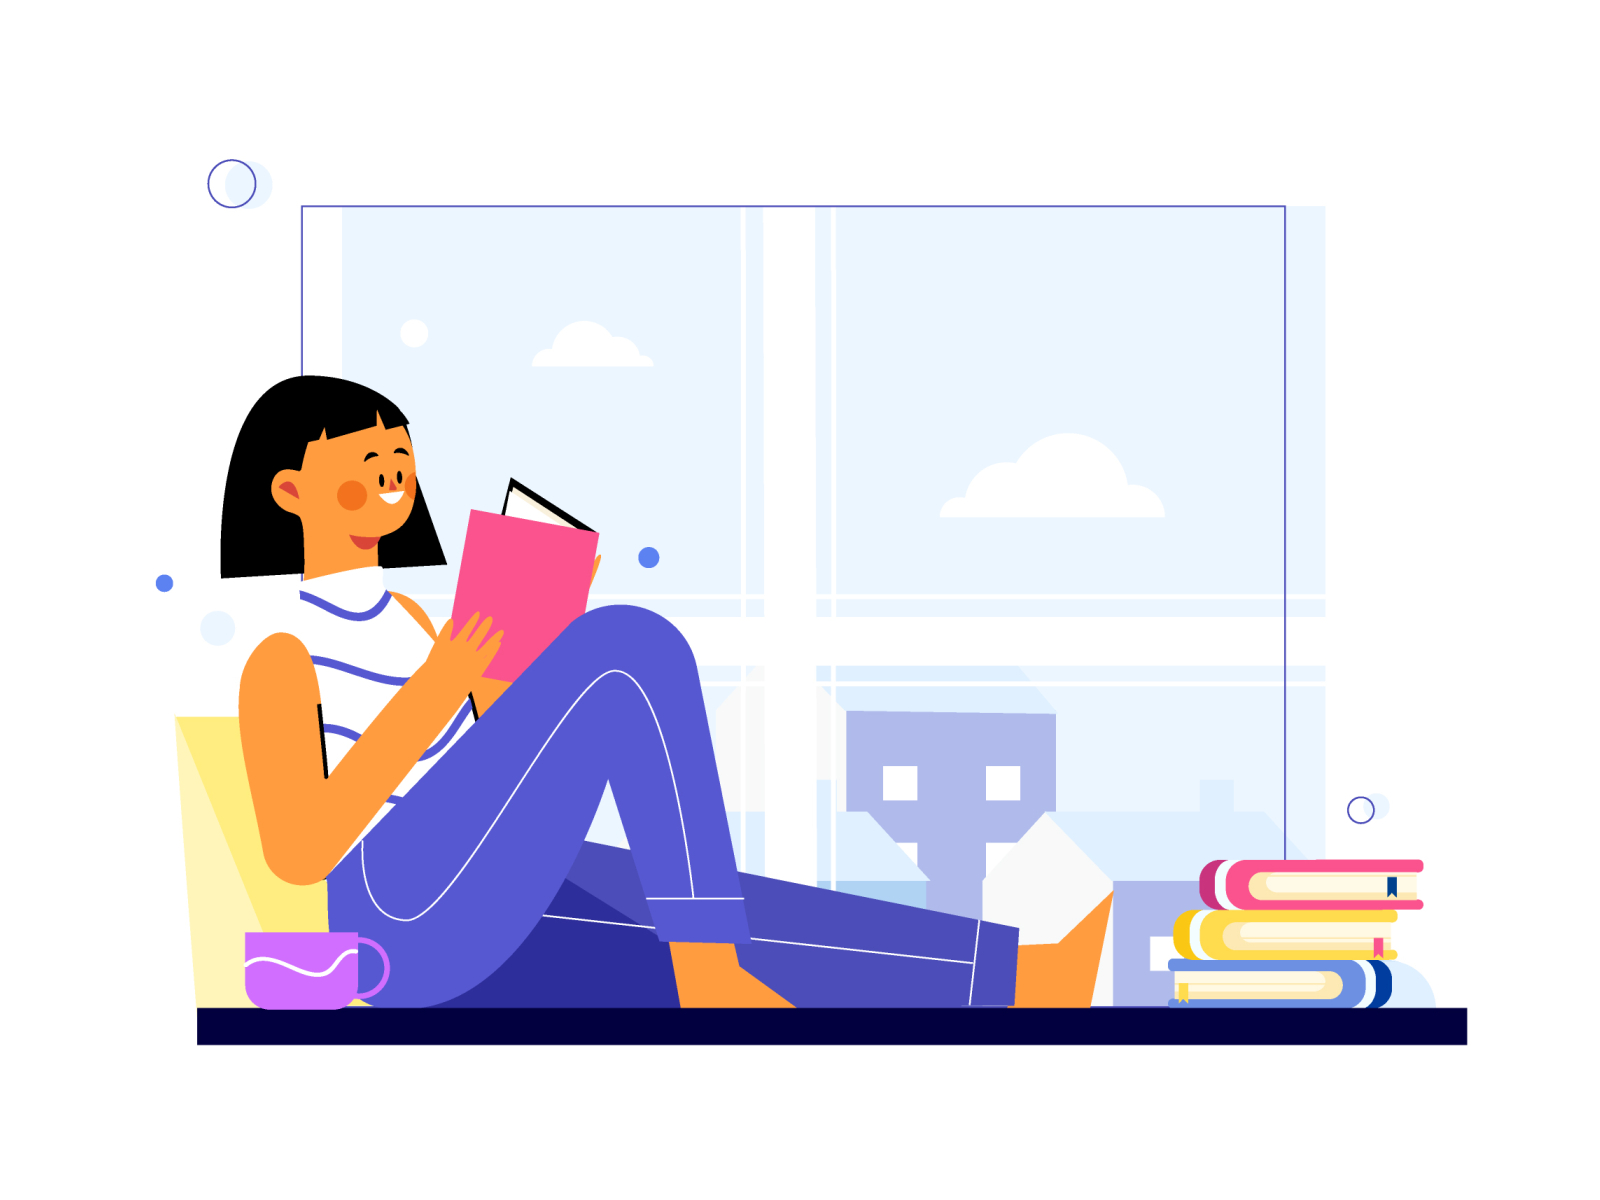 Knowledge First Project character education educational illustration insurance lifestyle people people illustration reading vector vector illustration